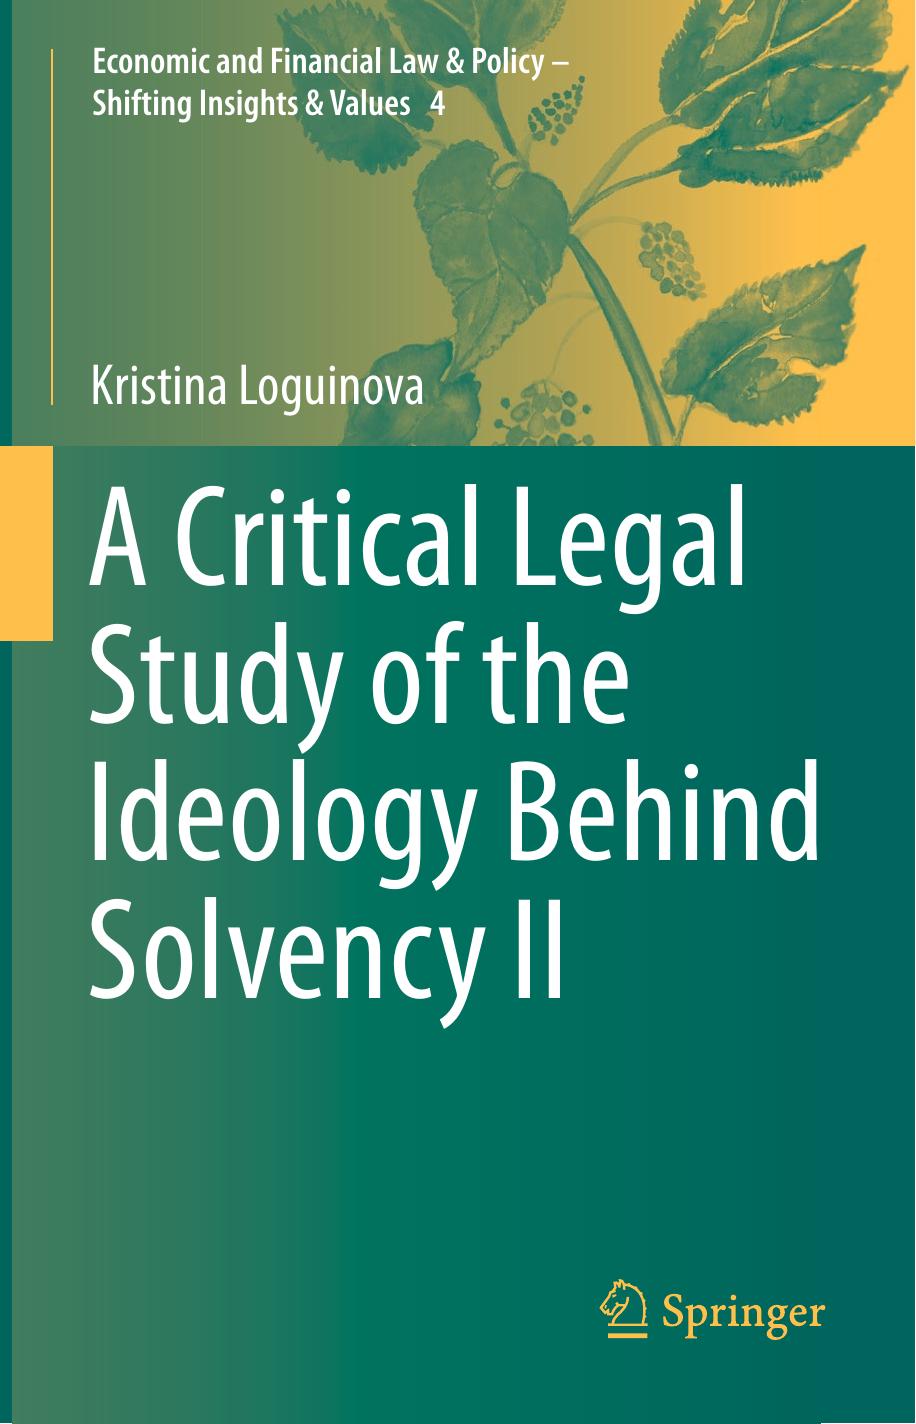 A Critical Legal Study of the Ideology Behind Solvency II by Kristina Loguinova